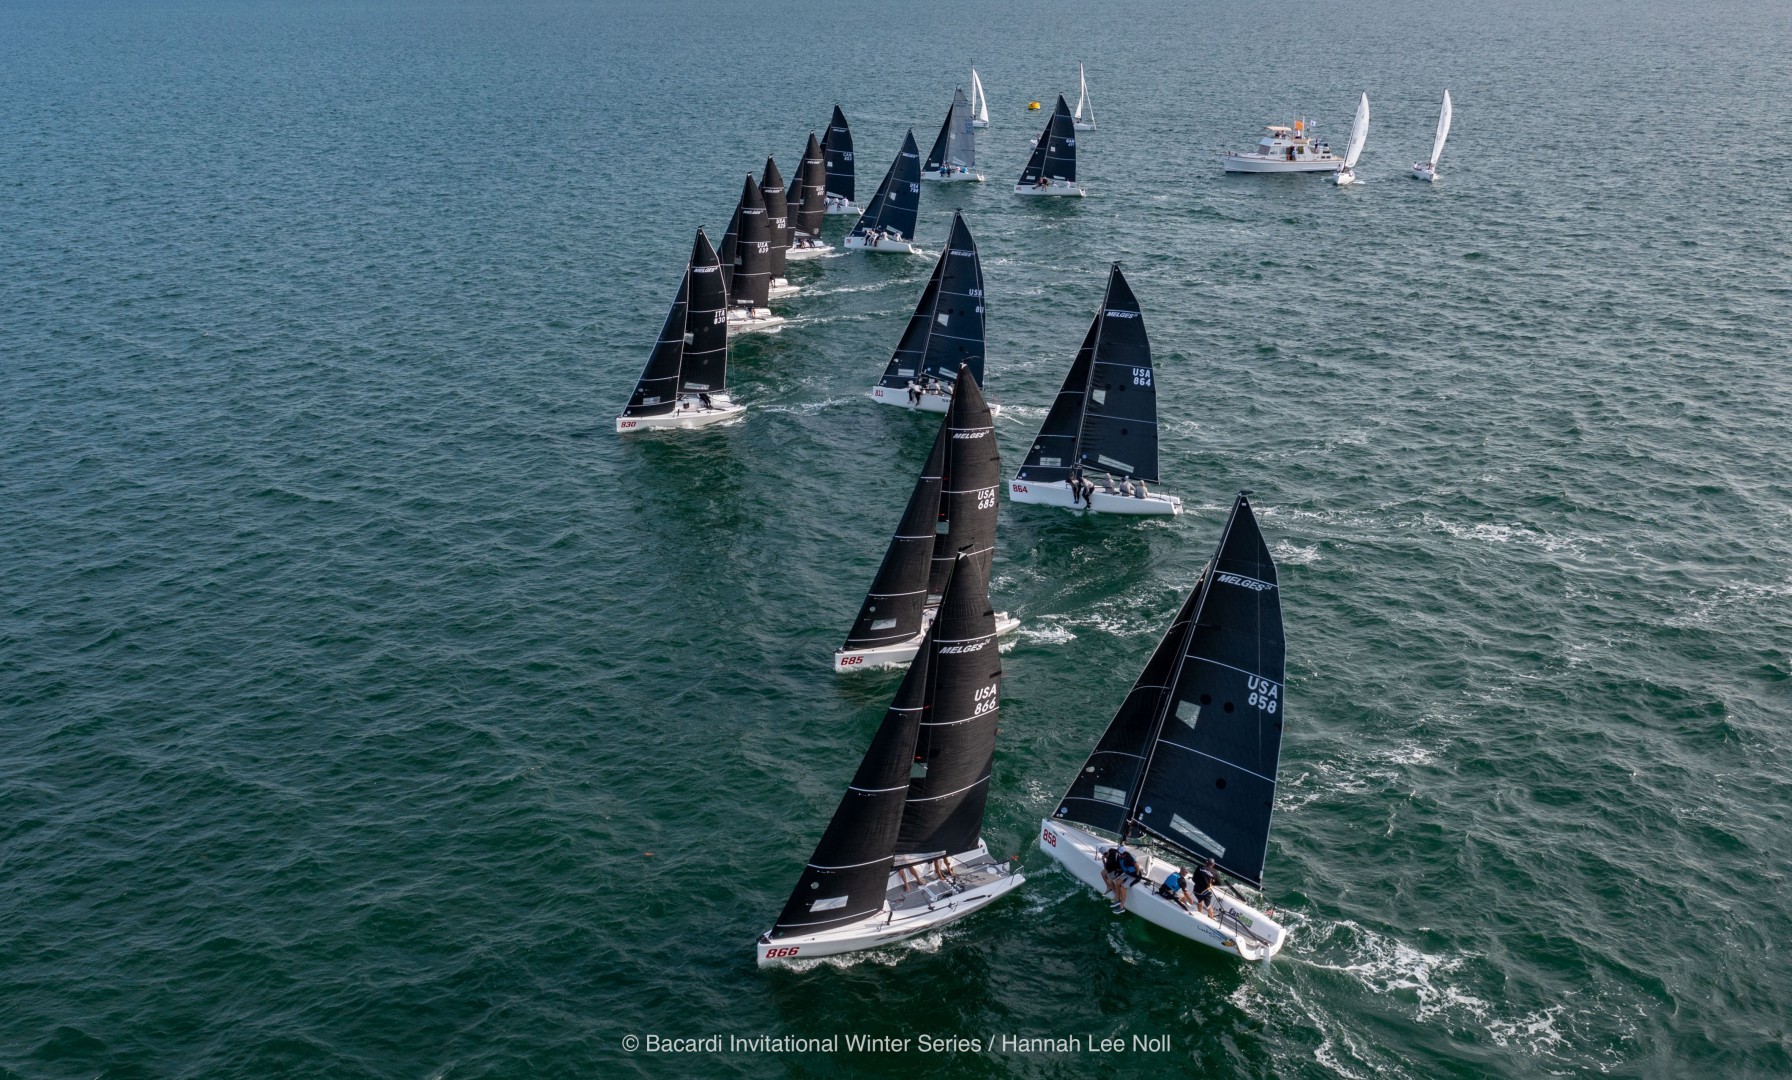 Challenging light wind opening day at Bacardi Winter Series event 1